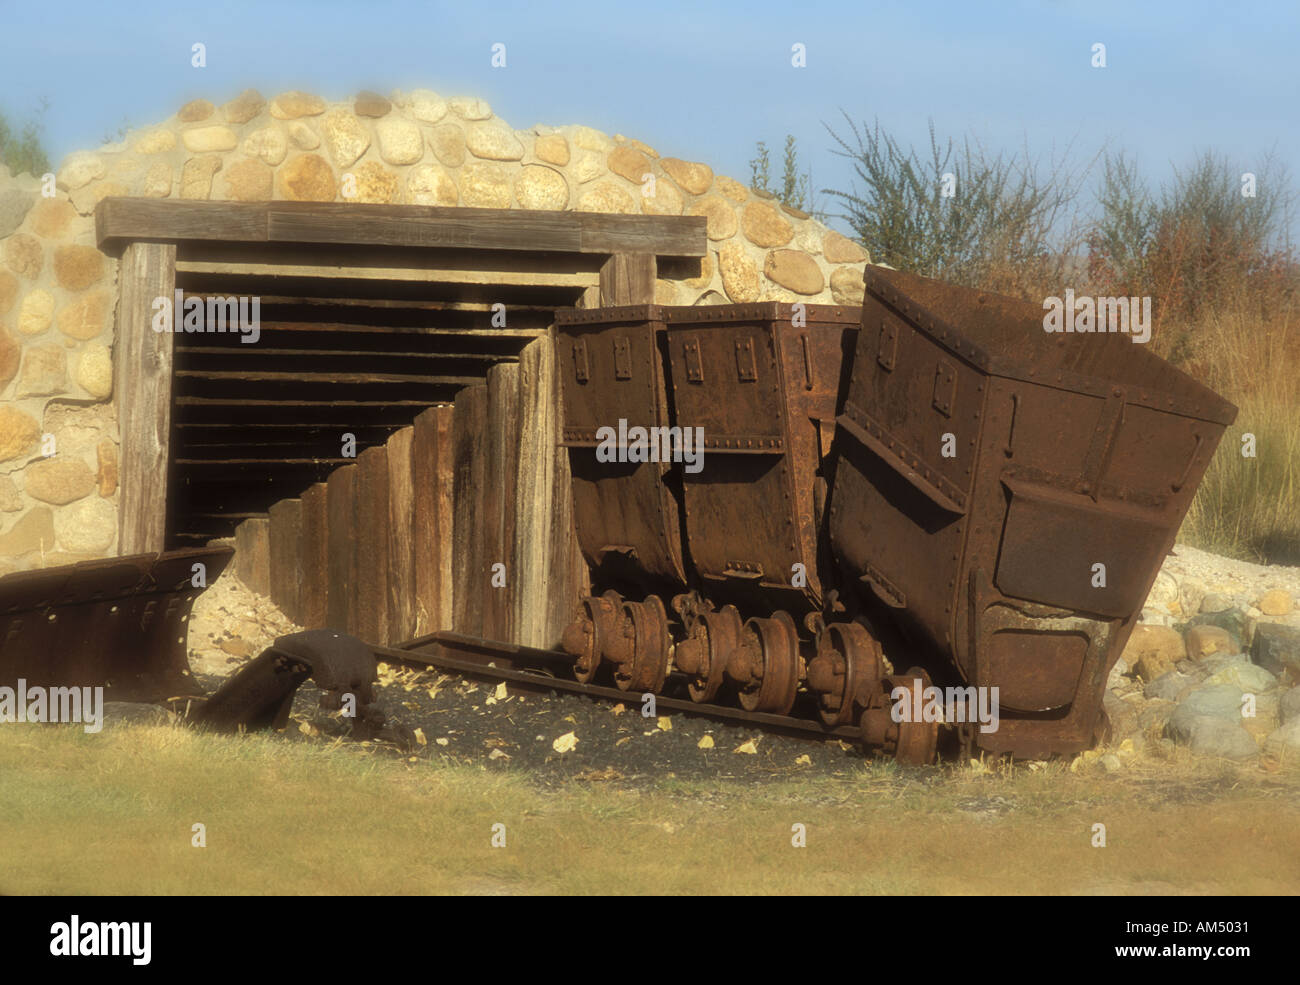 Old Mining Cars just outside a mine Stock Photo